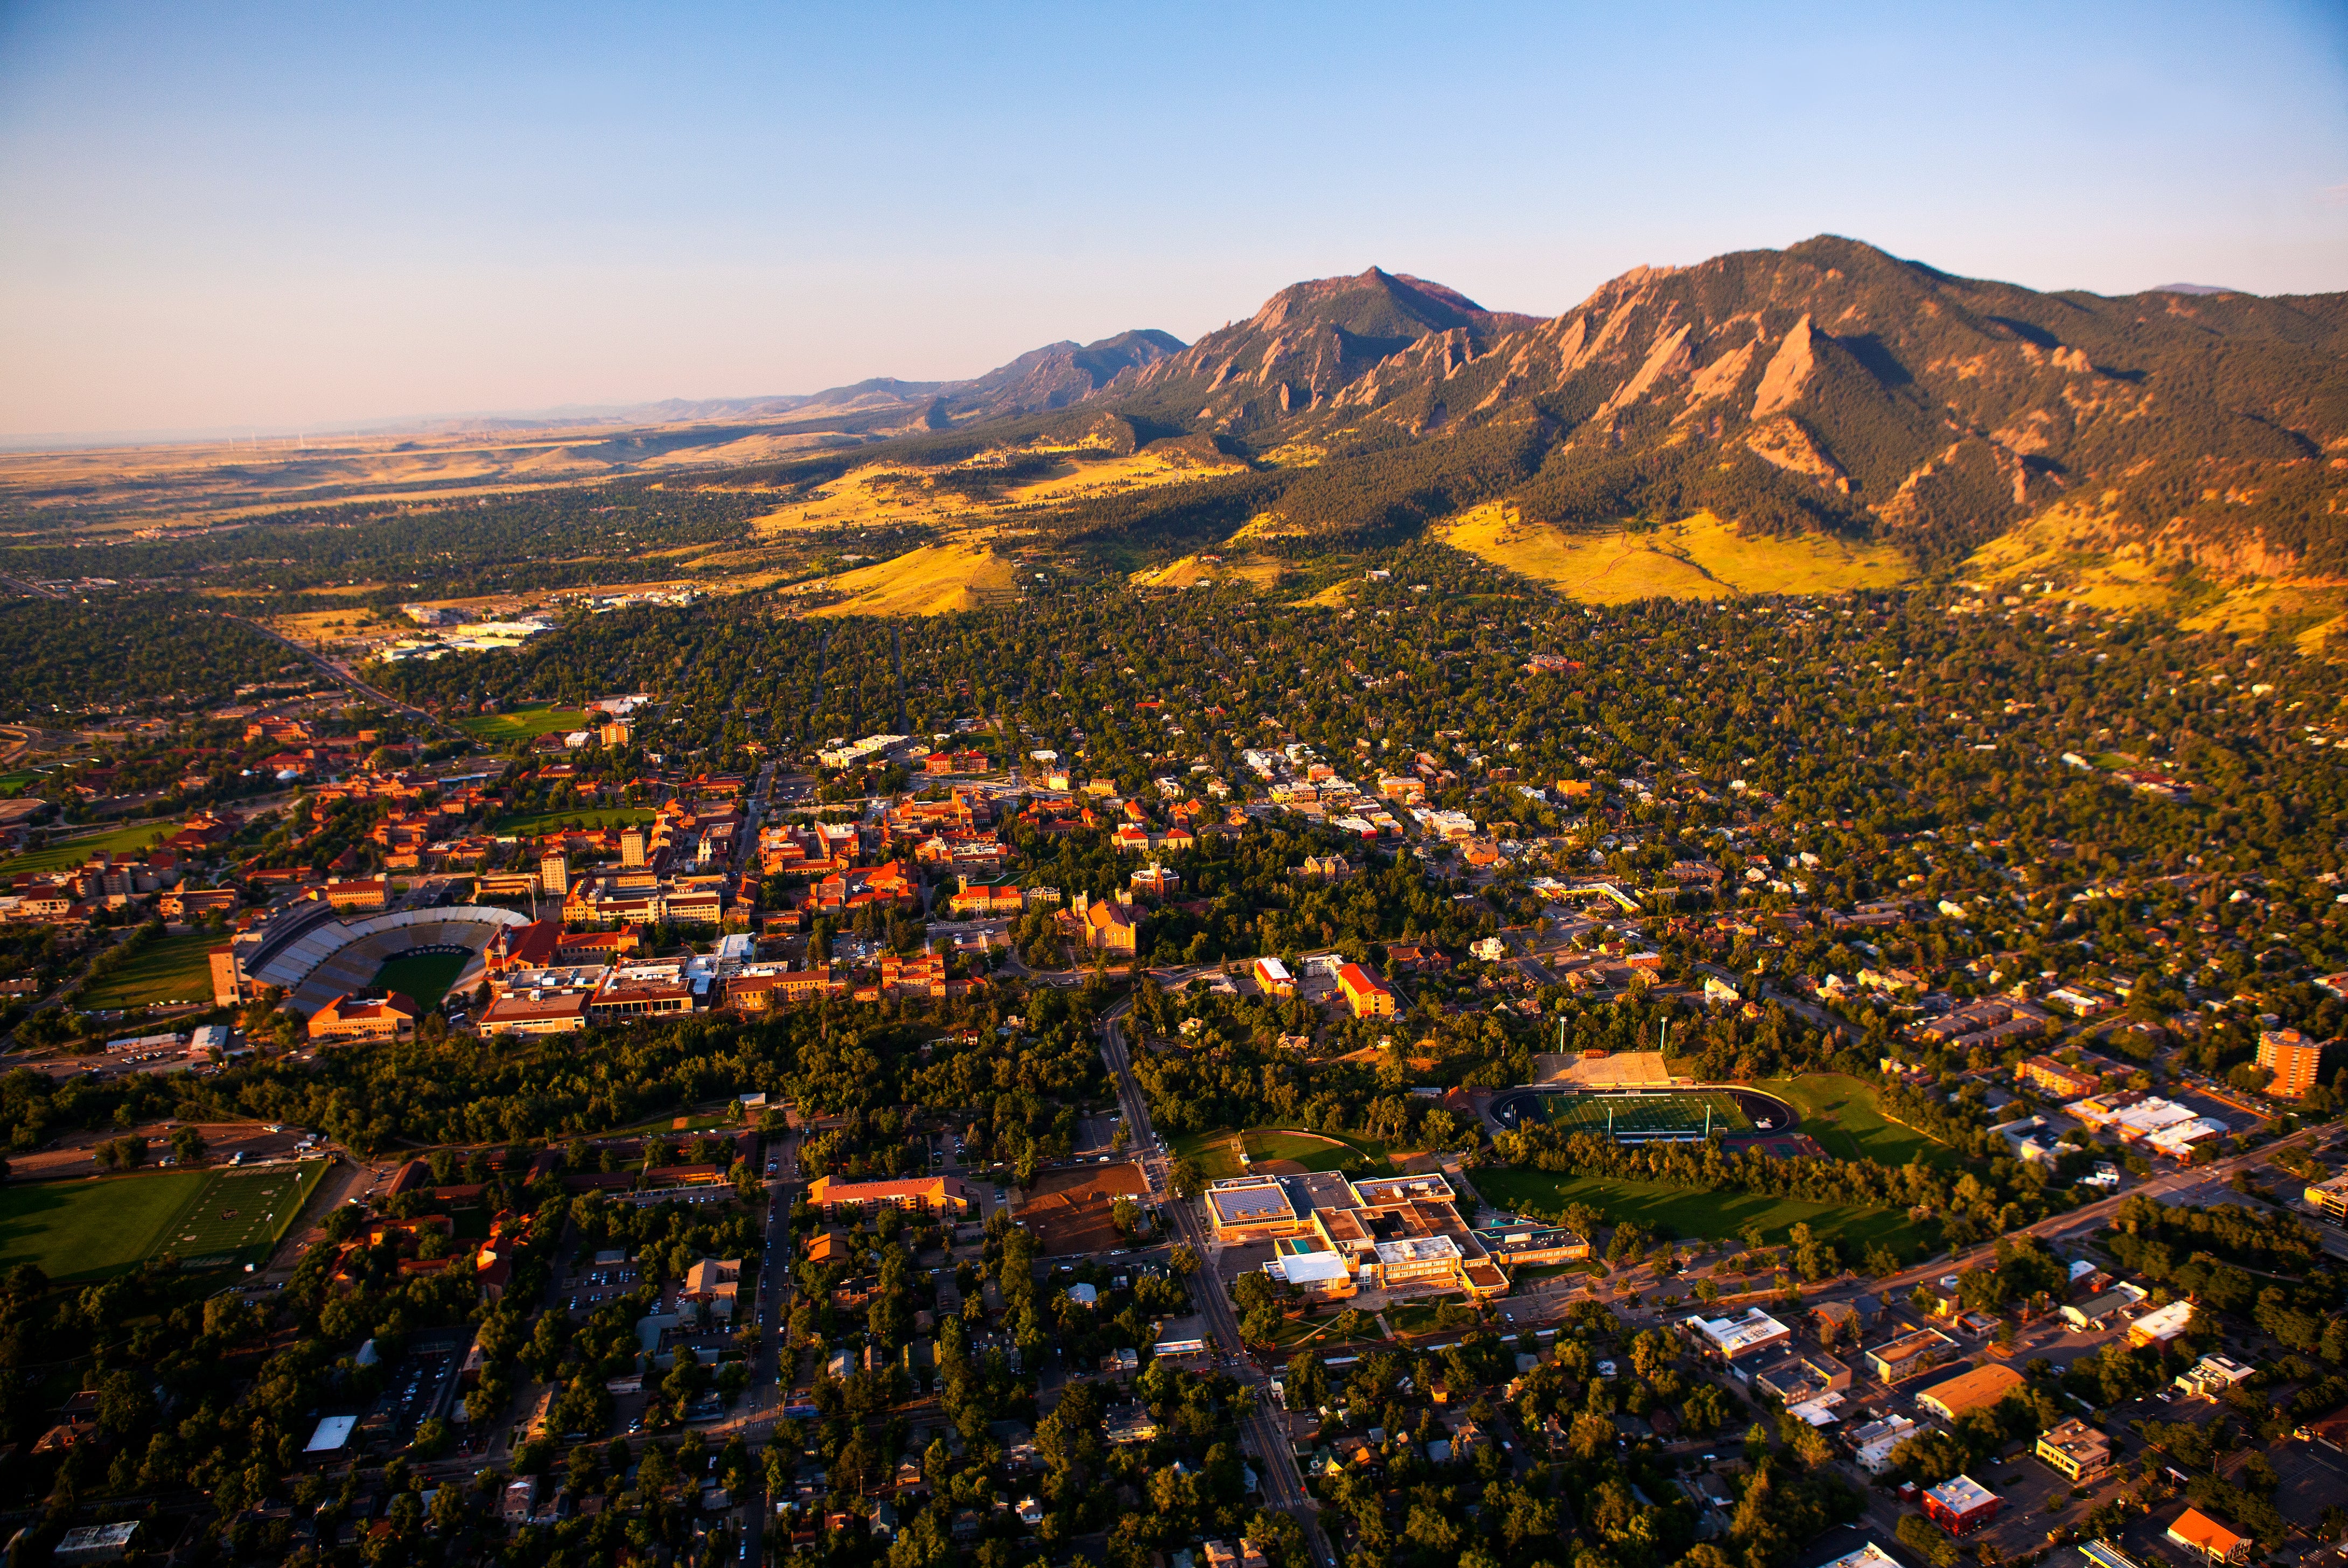 This city sits beneath the imposing Flatirons, a collection of peaks